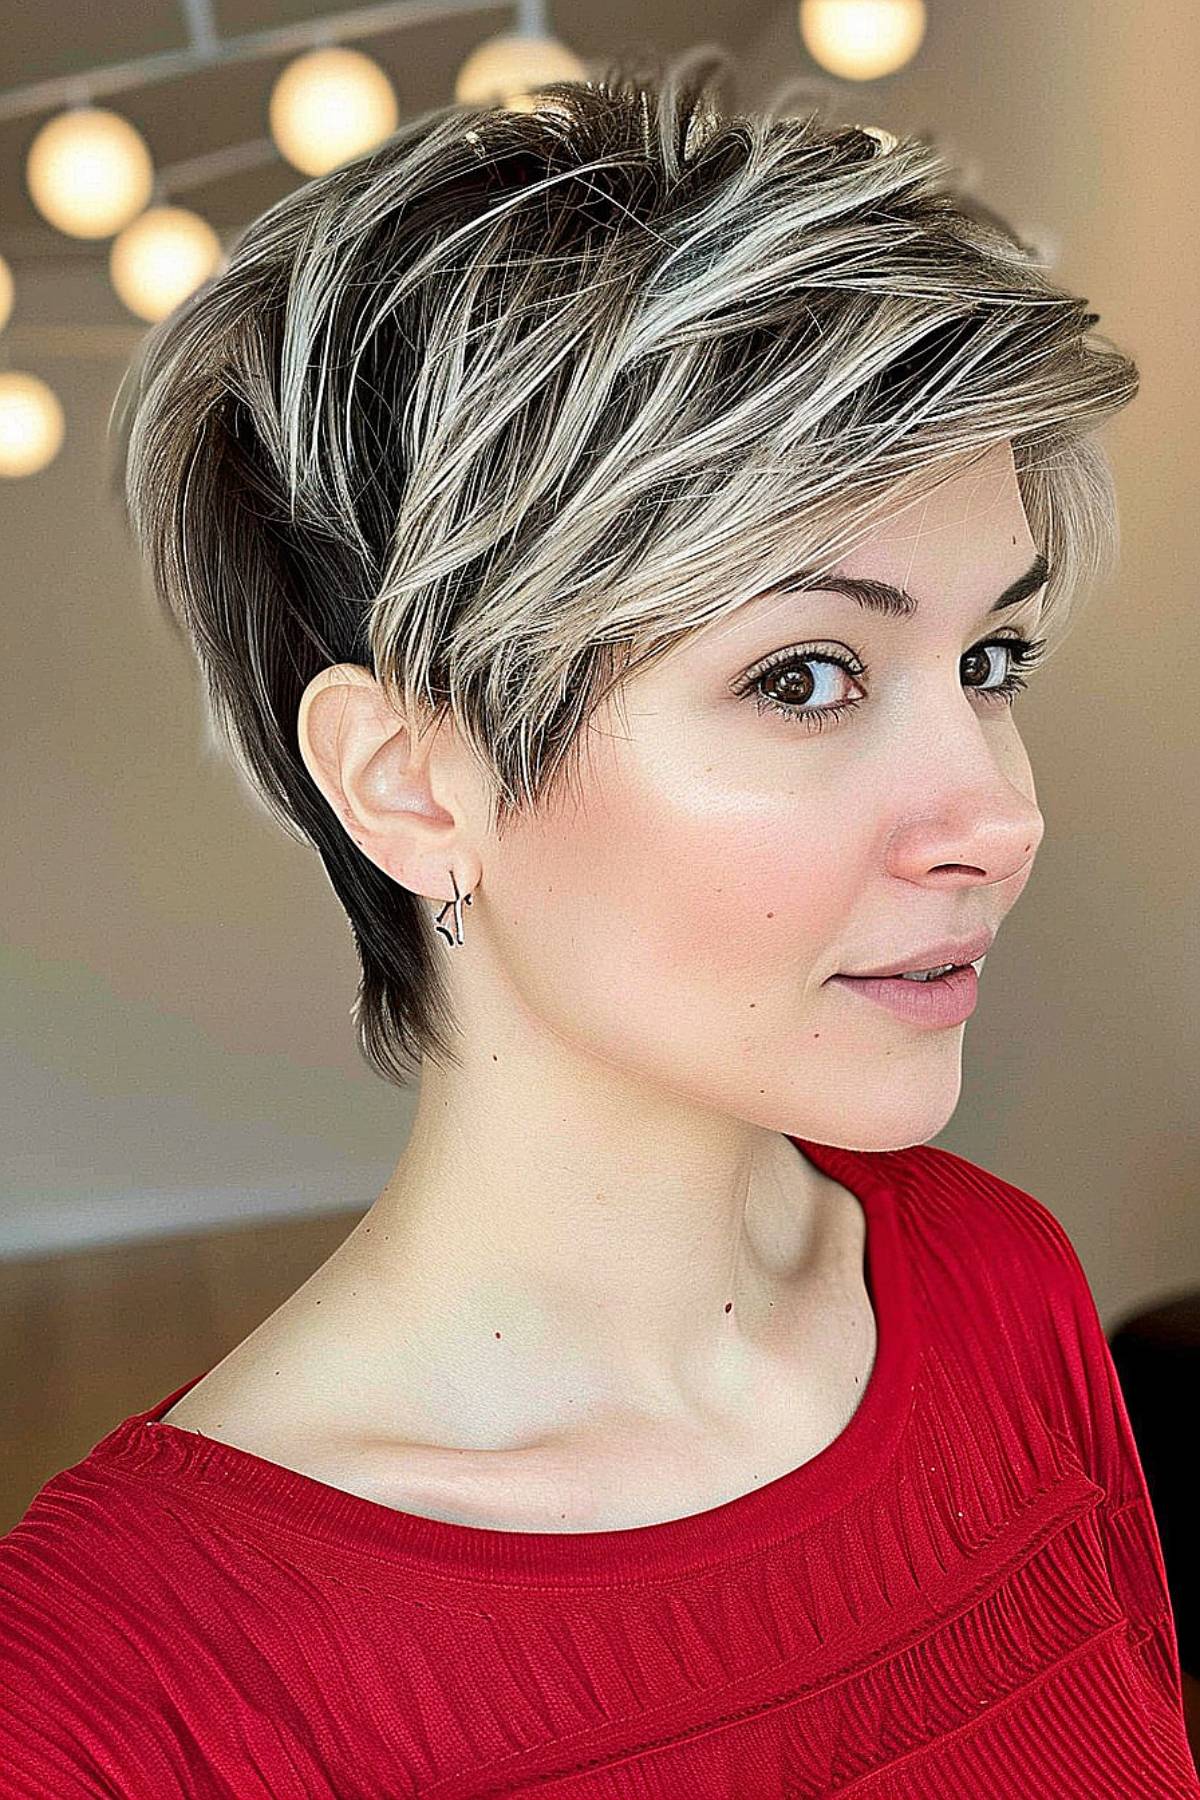 An elegant woman with long layers and an angled pixie cut, gently styled to flatter the face.